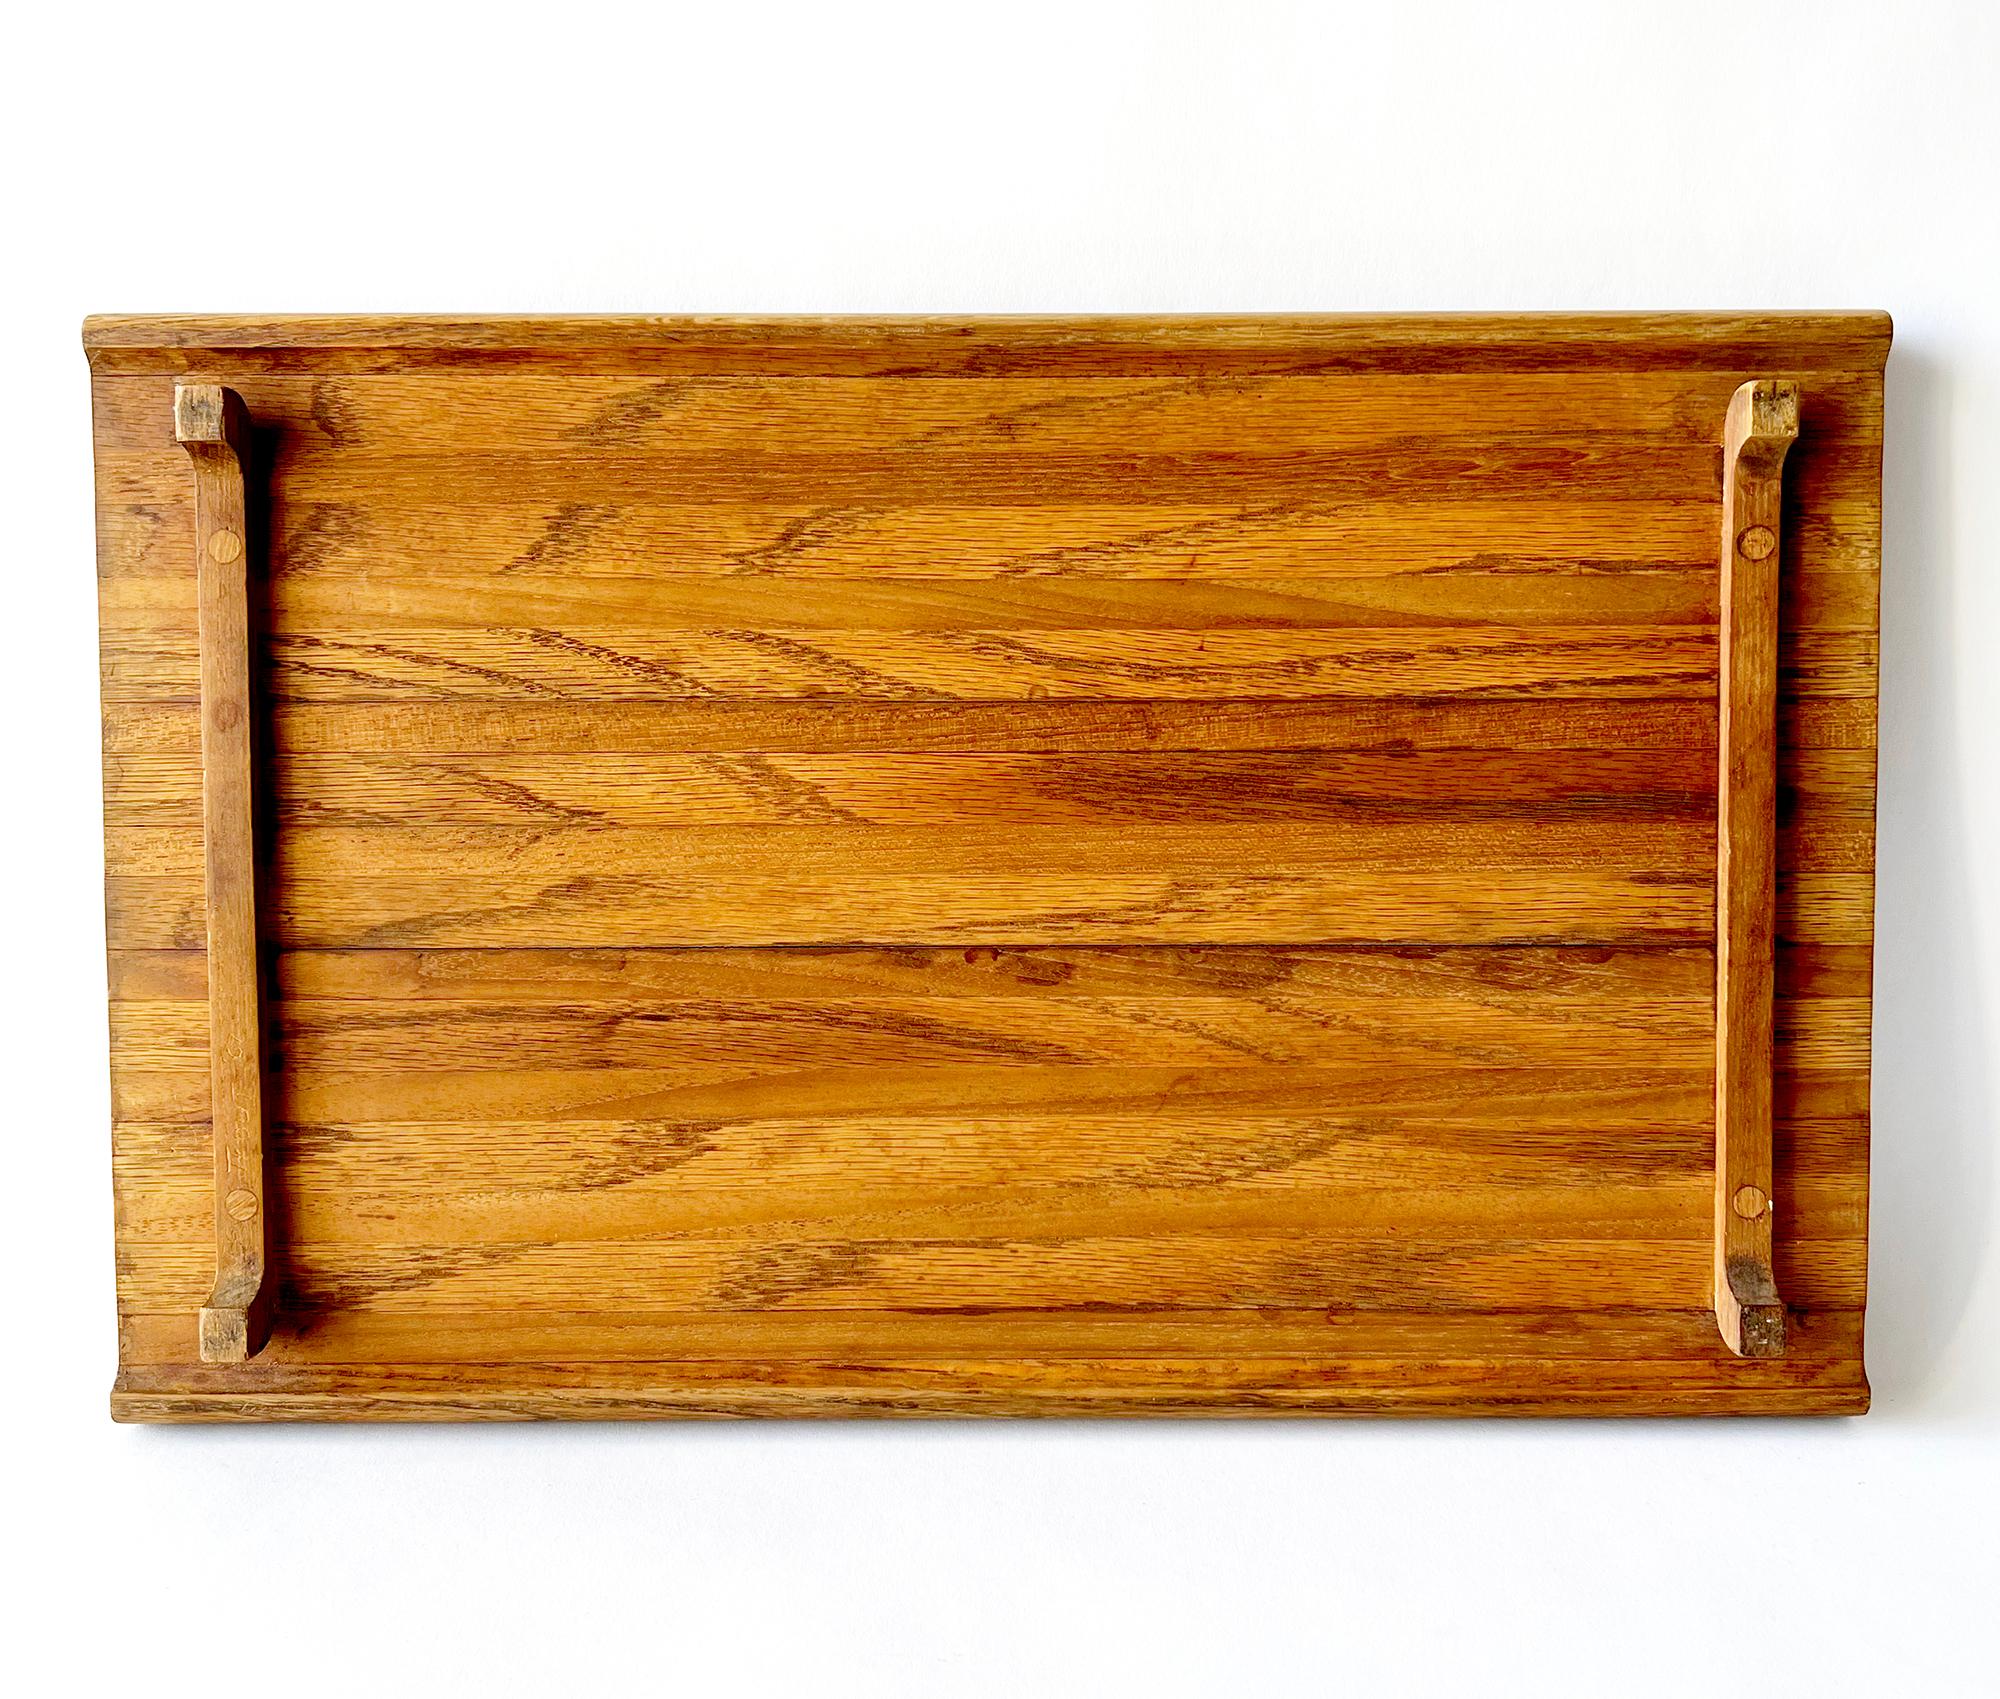 Late 20th Century Robert Trout California Studio Made Allied Crafts Laminated Wood Cutting Board For Sale